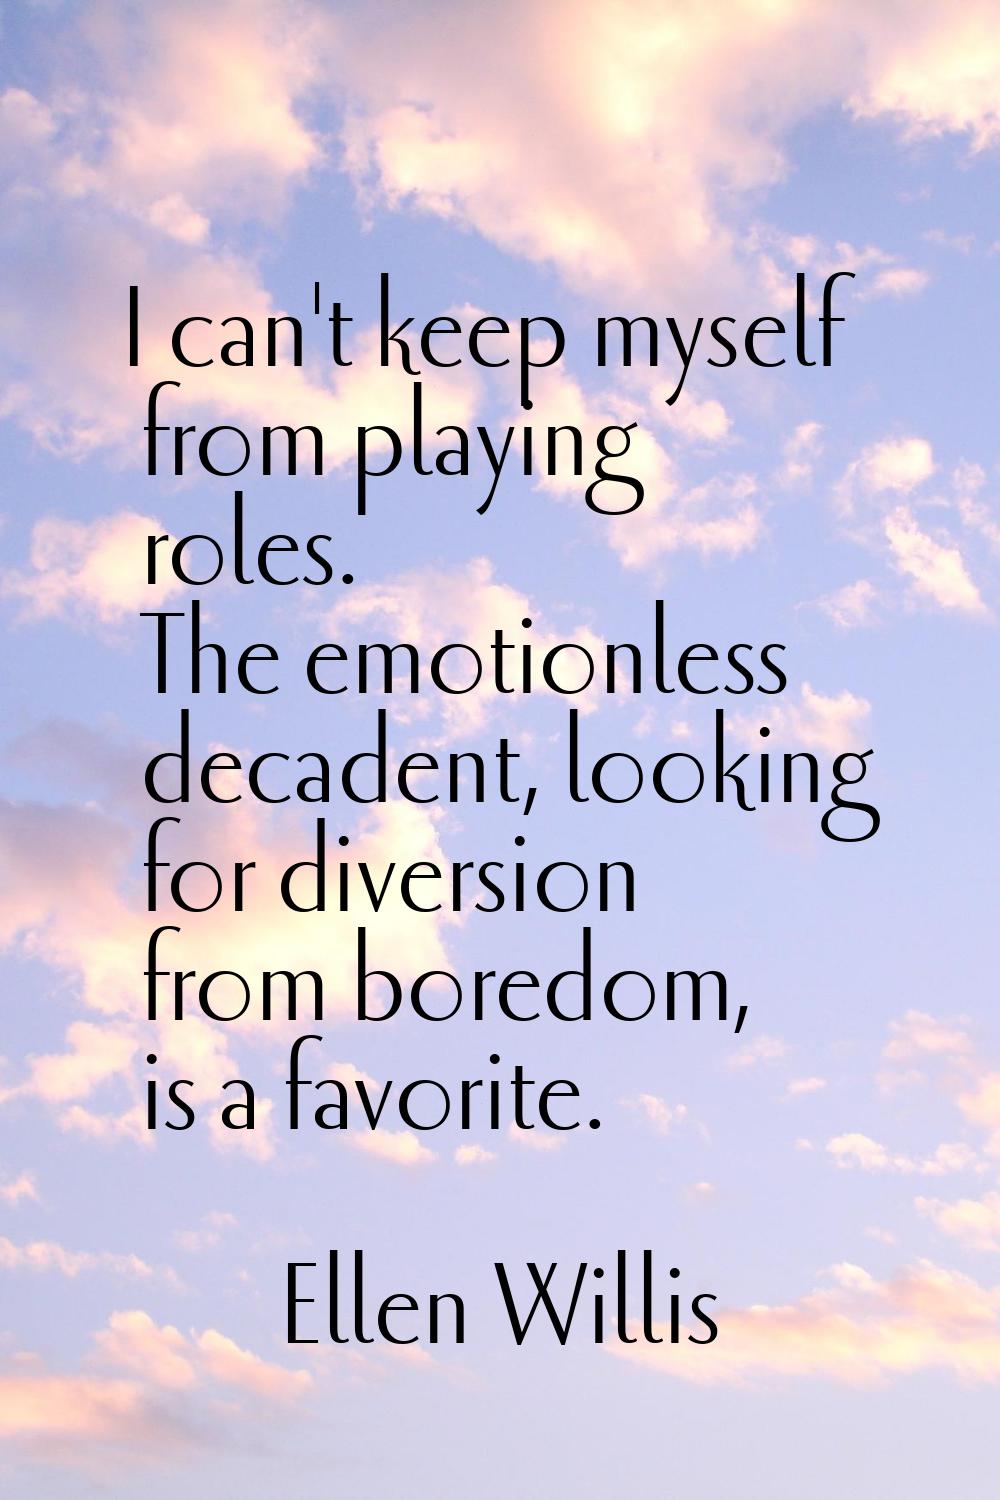 I can't keep myself from playing roles. The emotionless decadent, looking for diversion from boredo